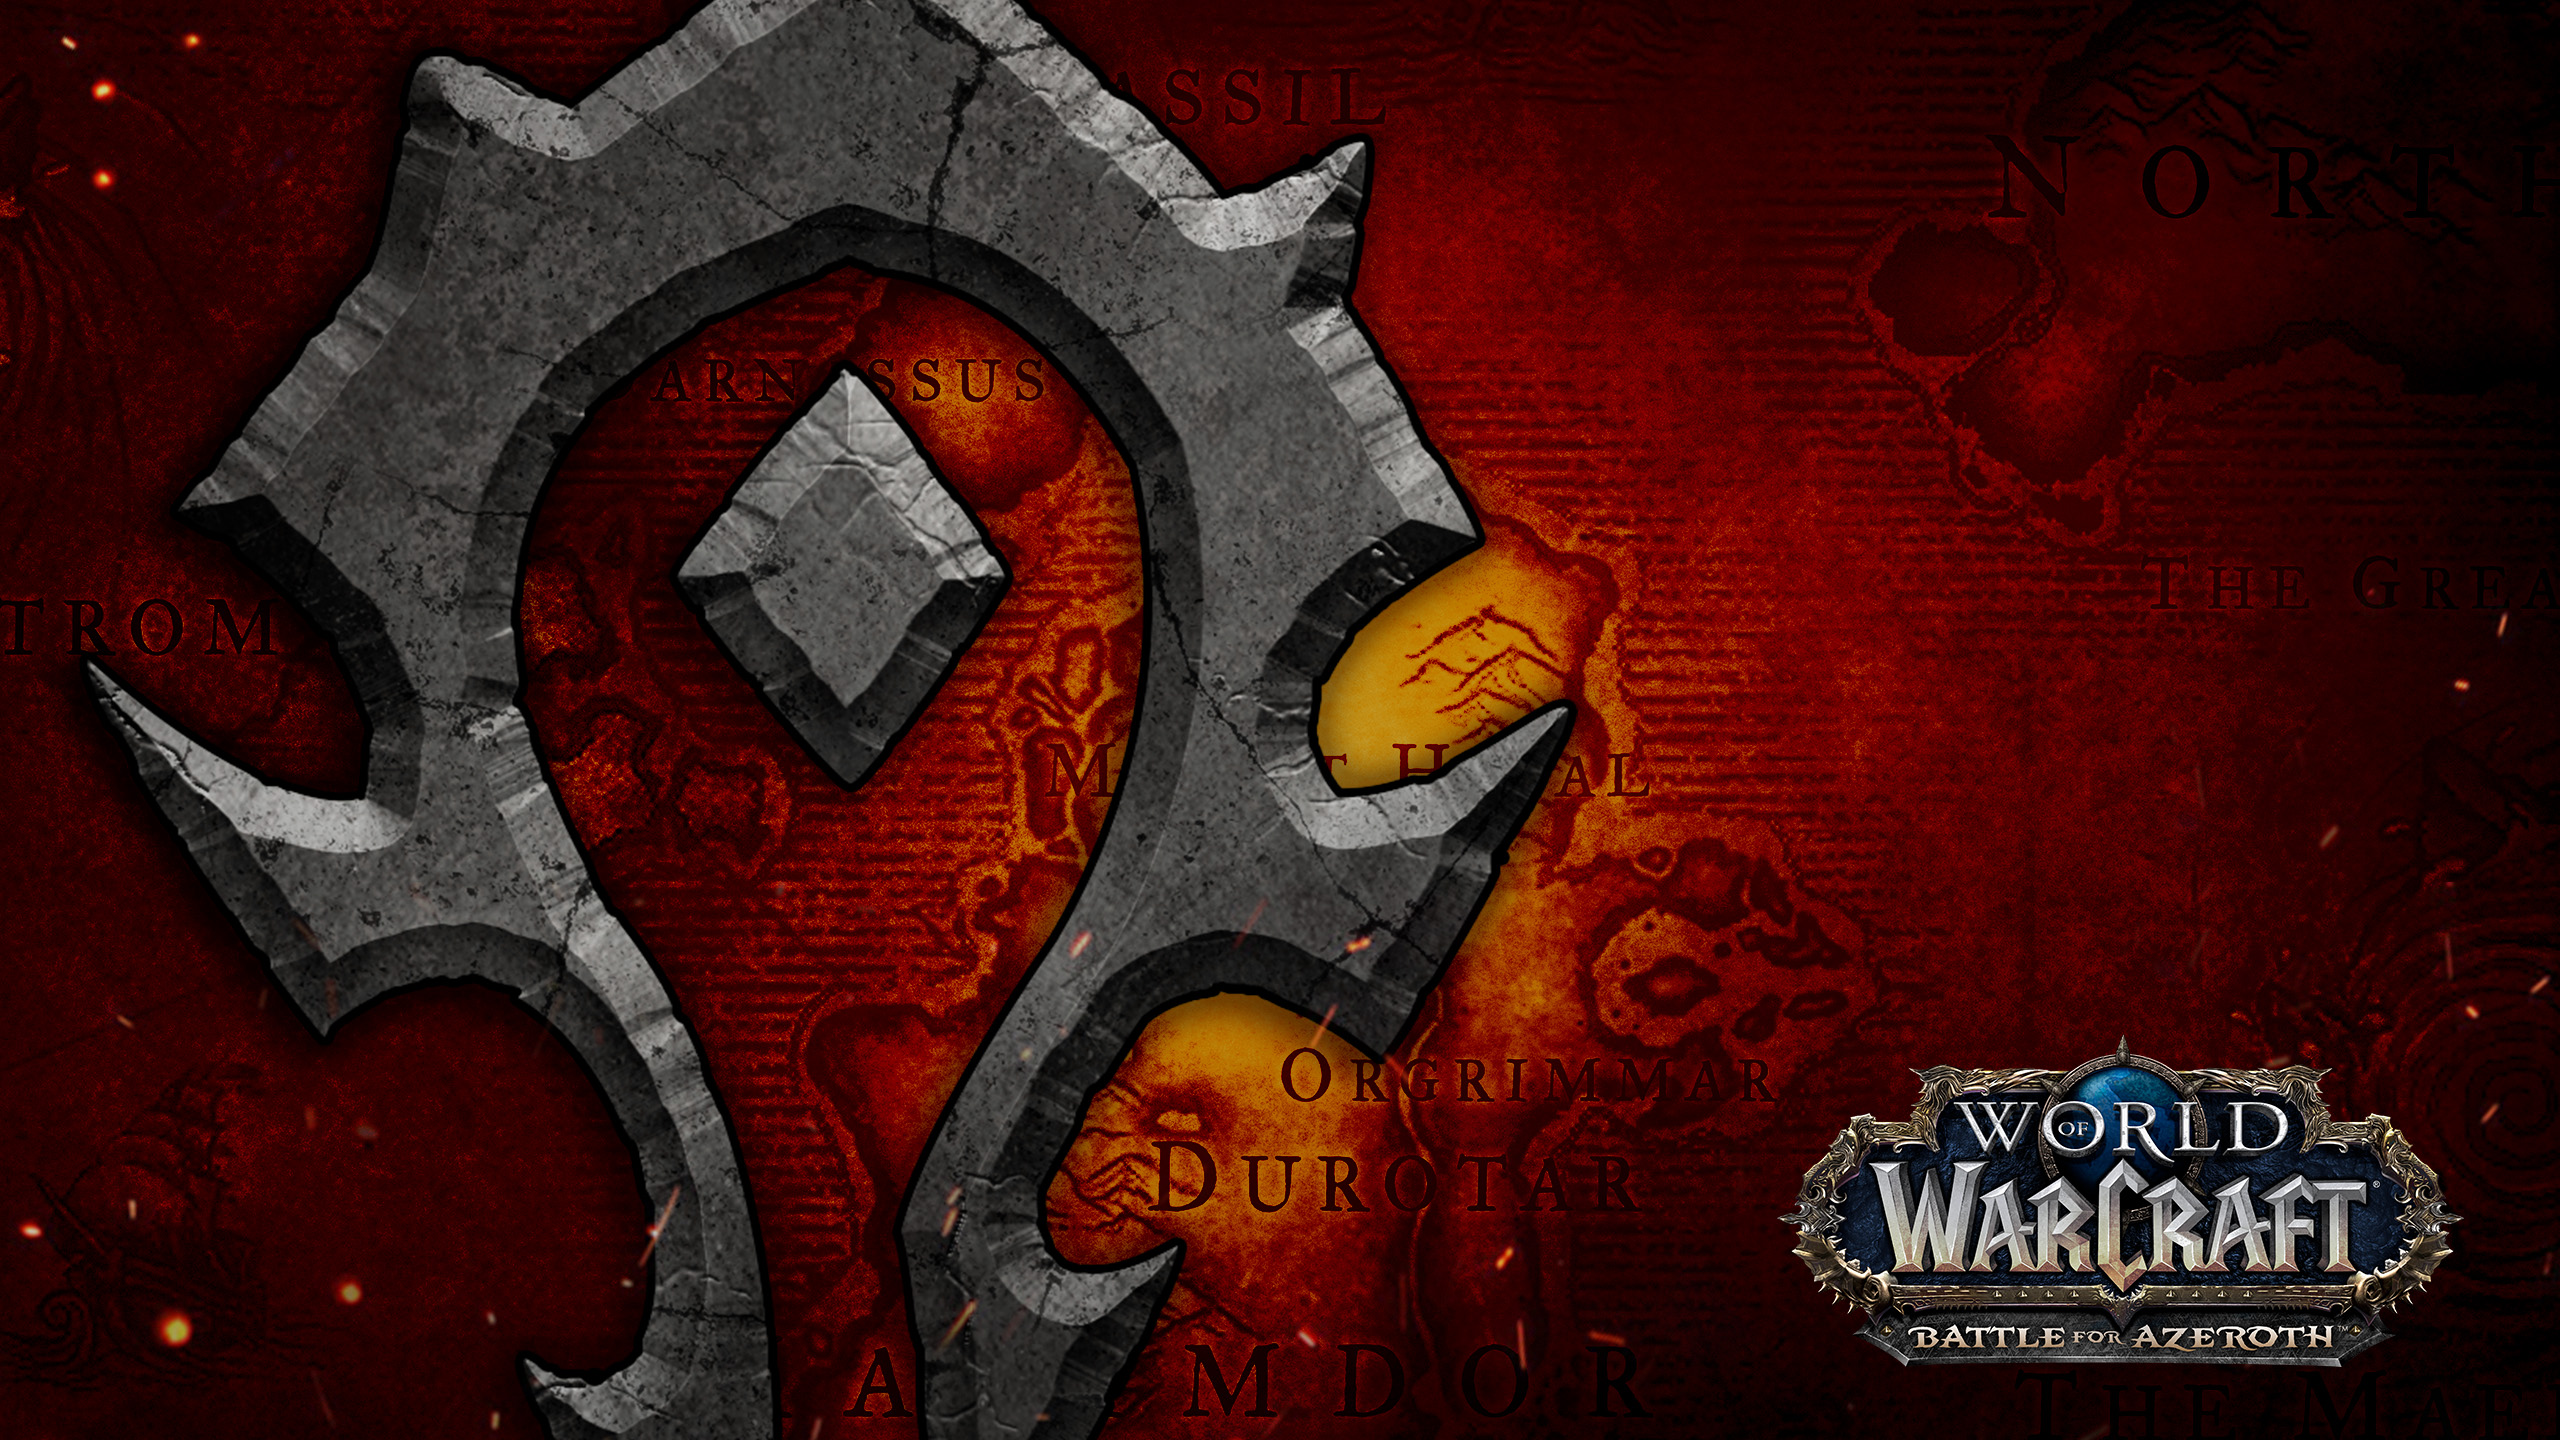 World Of Warcraft World Of Warcraft Battle For Azeroth Horde Video Games Video Game Art Logo 2560x1440